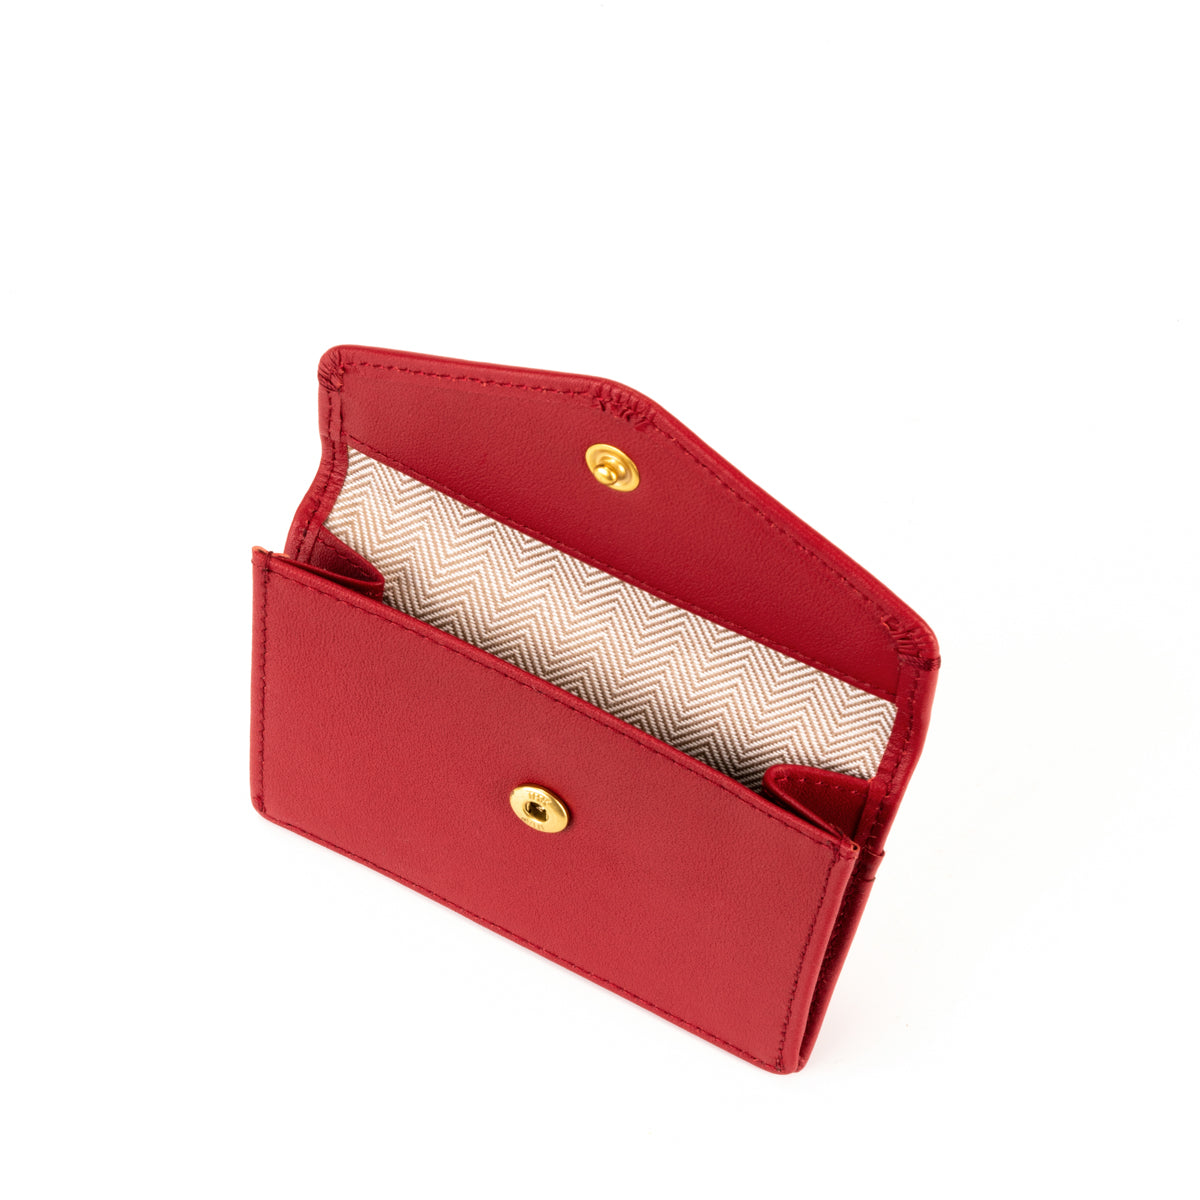 Envelope Flap Coin Pouch Card Holder (RFID USA Nappa Leather)